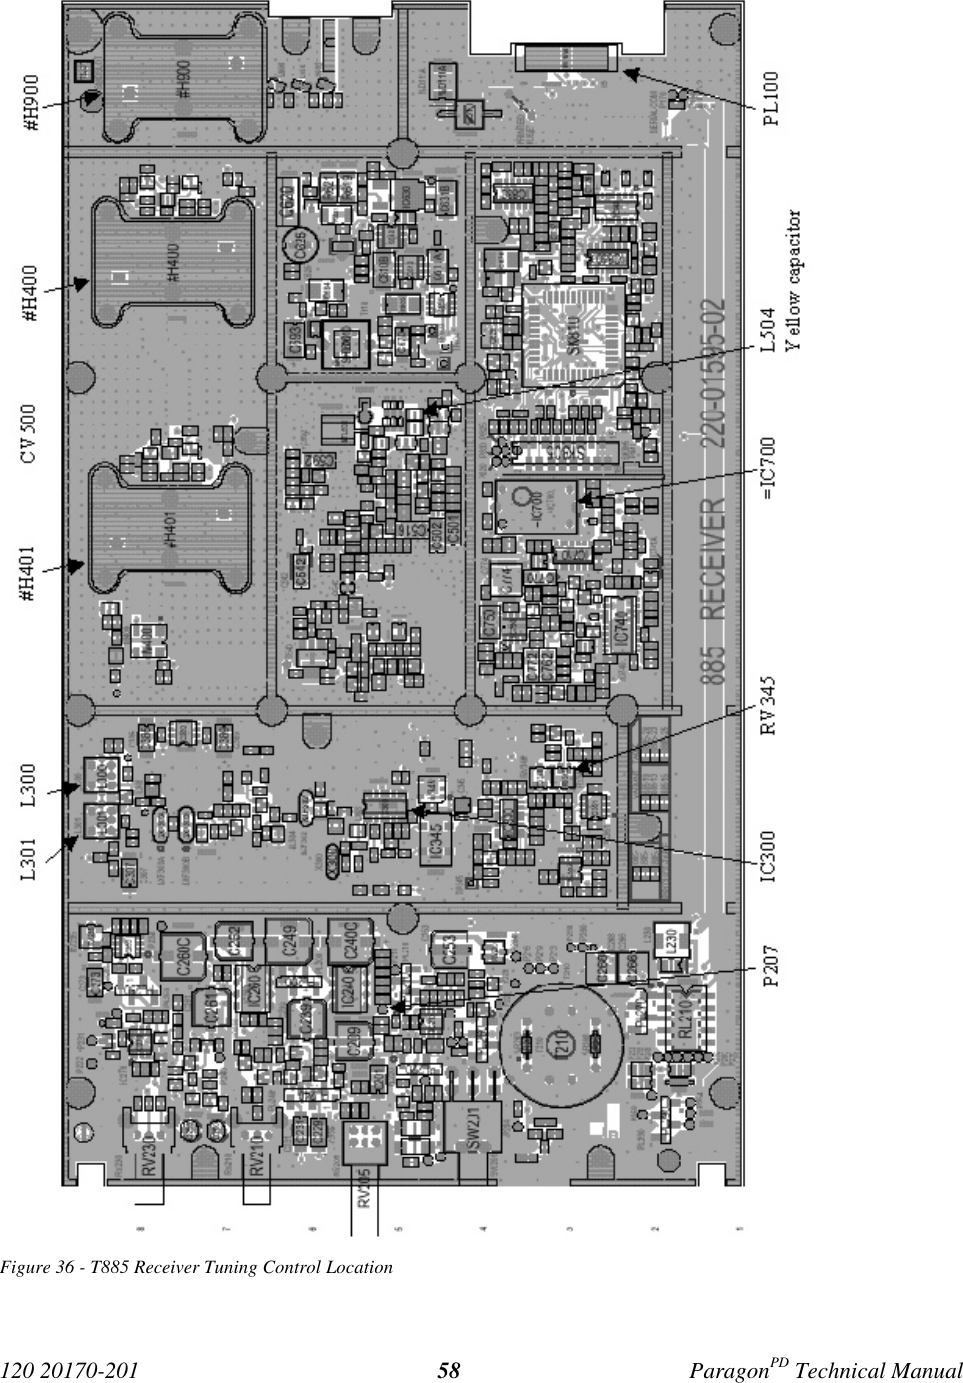 120 20170-201 ParagonPD Technical Manual58Figure 36 - T885 Receiver Tuning Control Location